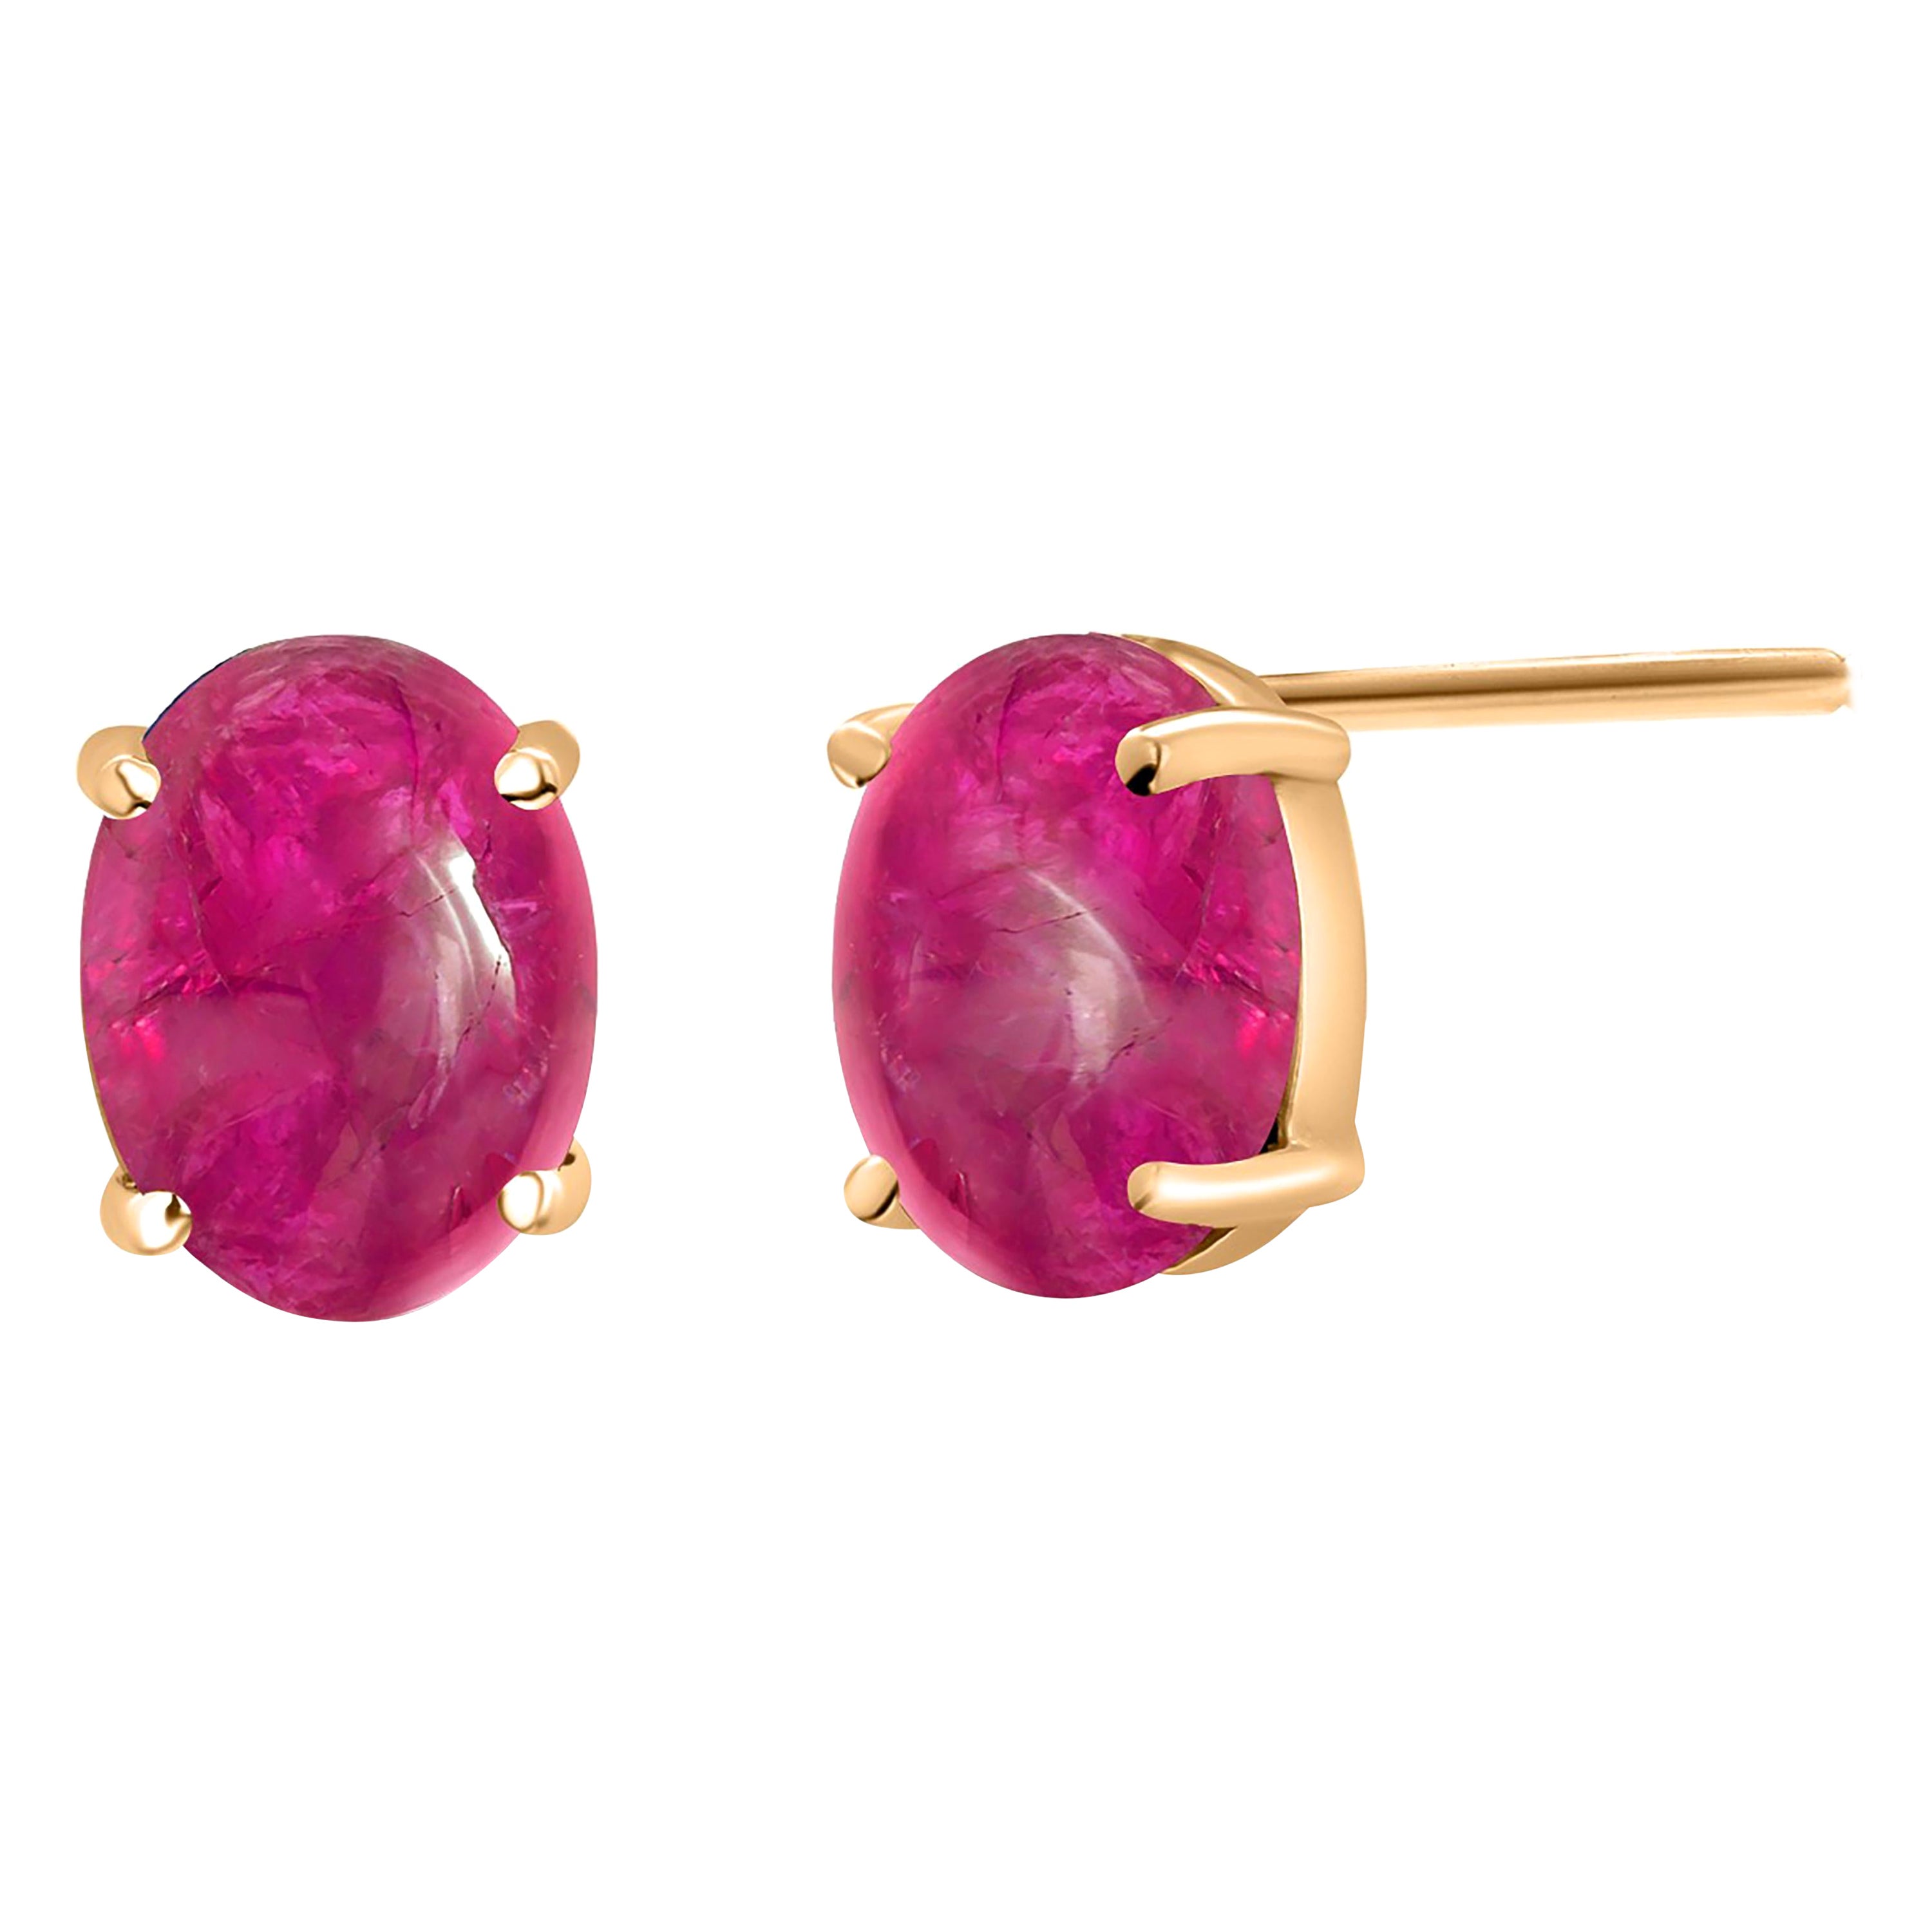 Matched Oval Cabochon Ruby 2.08 Carat Yellow Gold 0.27 x 0.20 Inch Stud Earrings For Sale